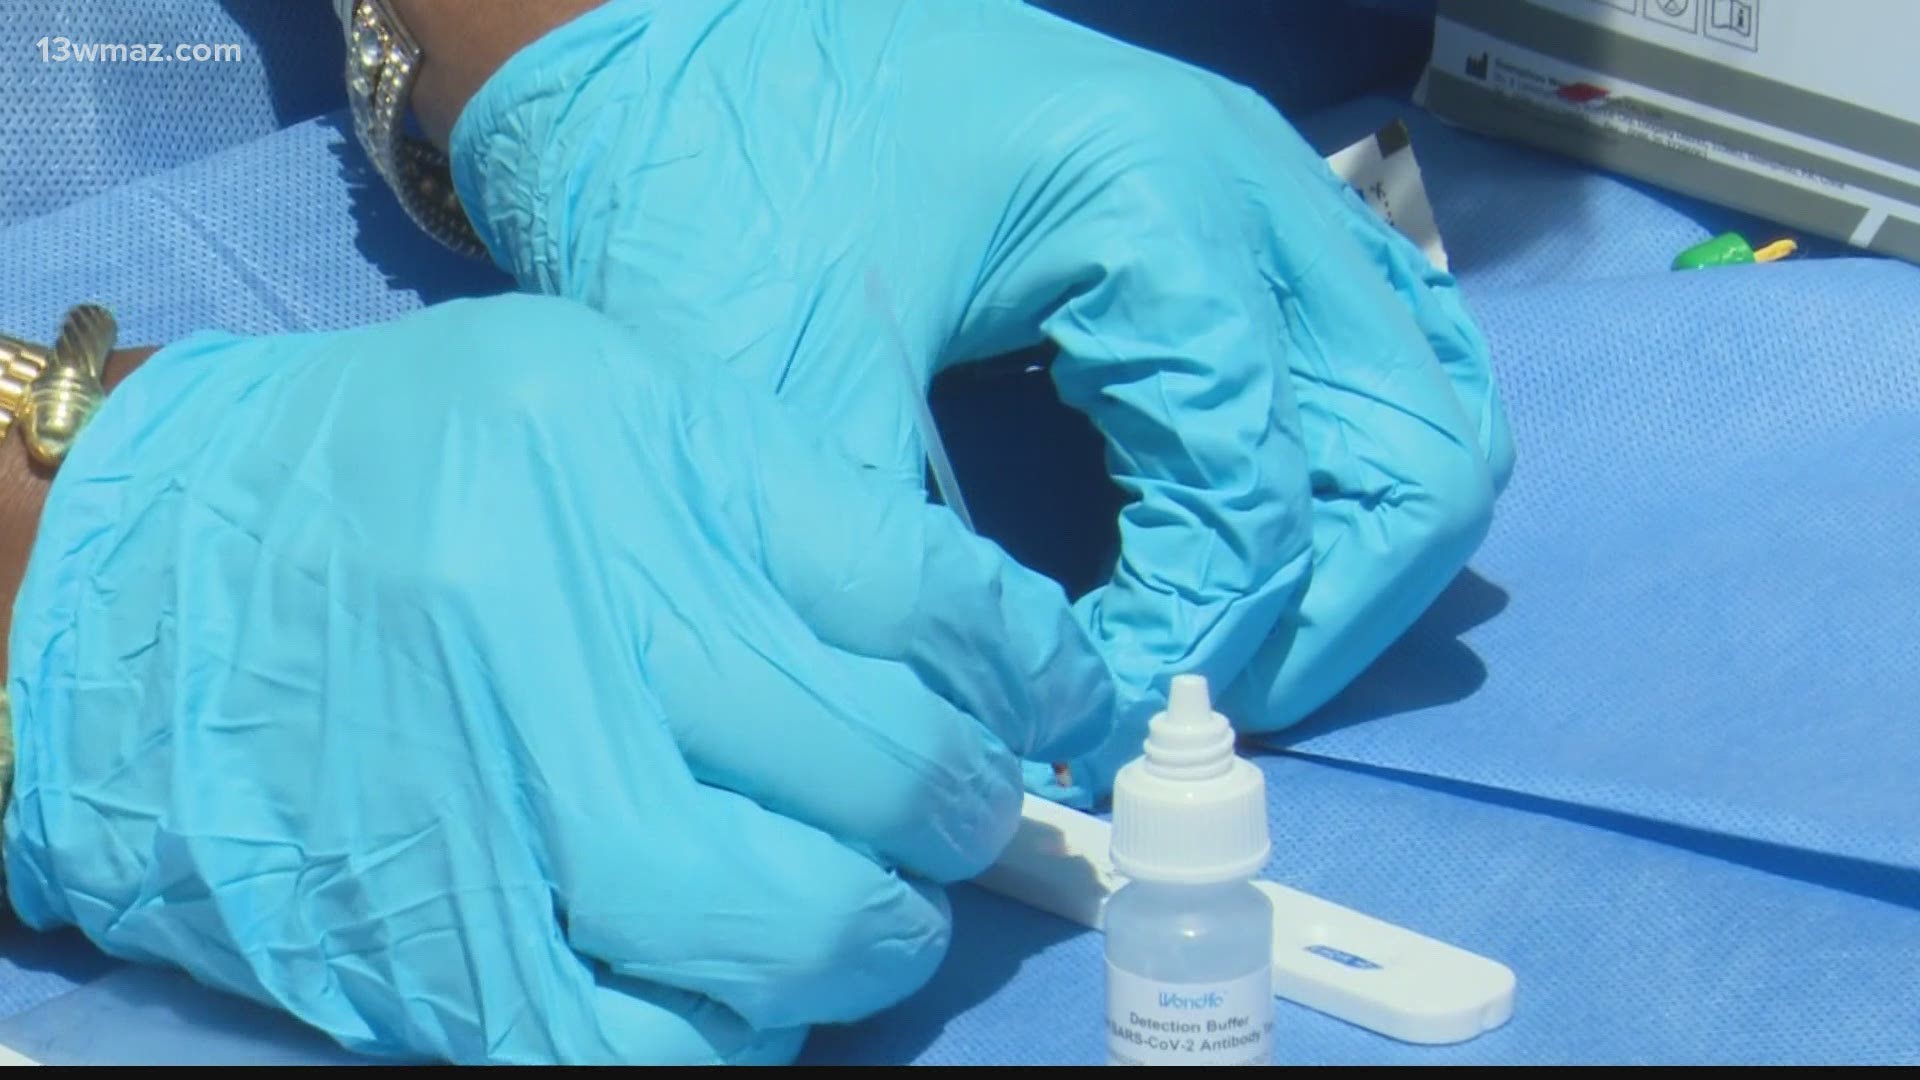 Since the start of the pandemic, Houston County has had 3,912 confirmed cases and 98 deaths.